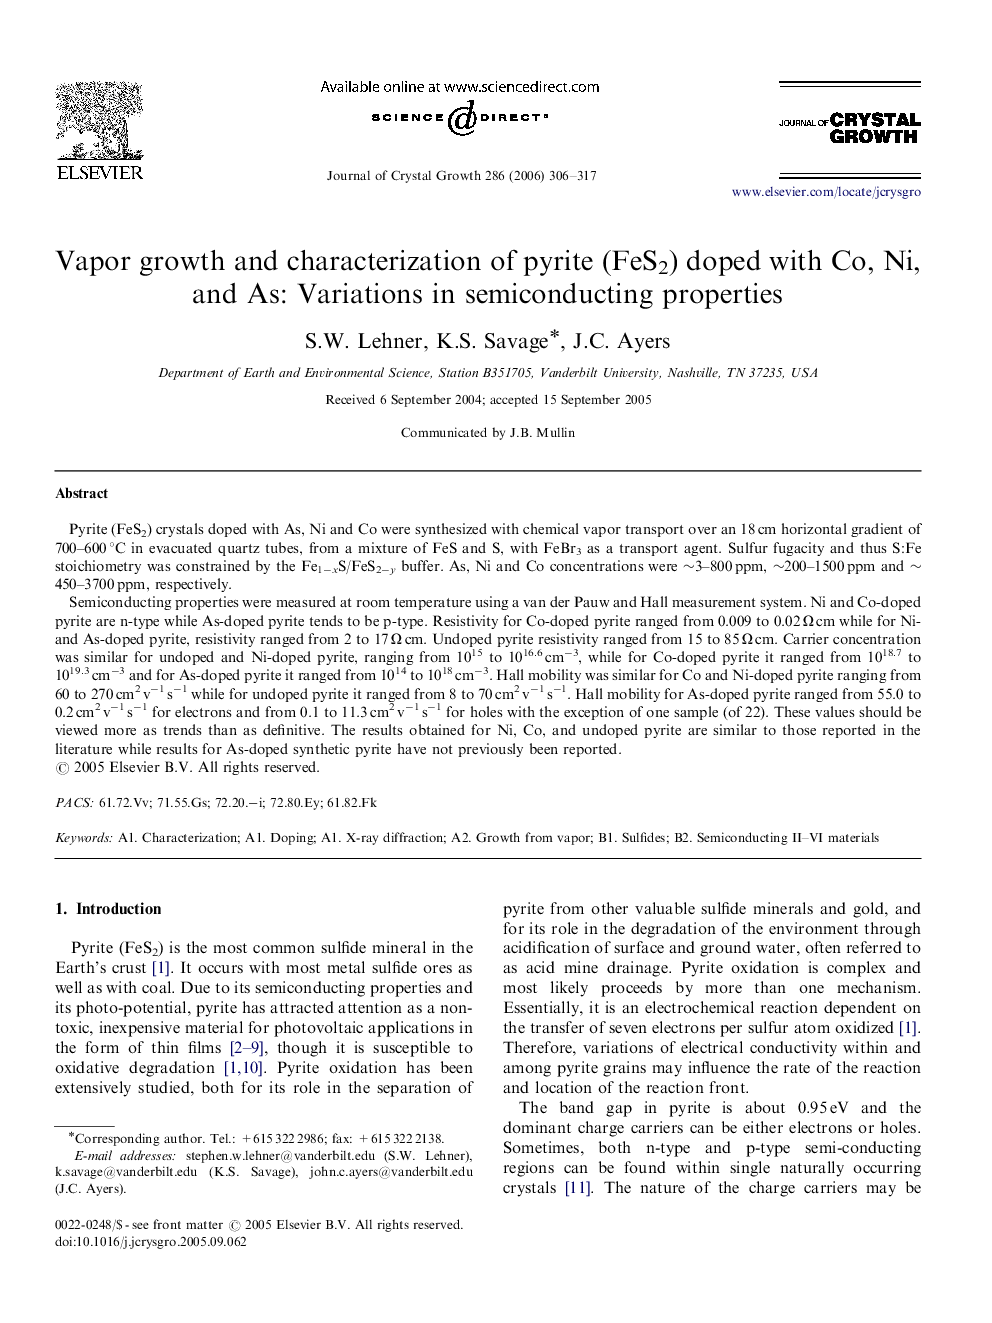 Vapor growth and characterization of pyrite (FeS2) doped with Co, Ni, and As: Variations in semiconducting properties